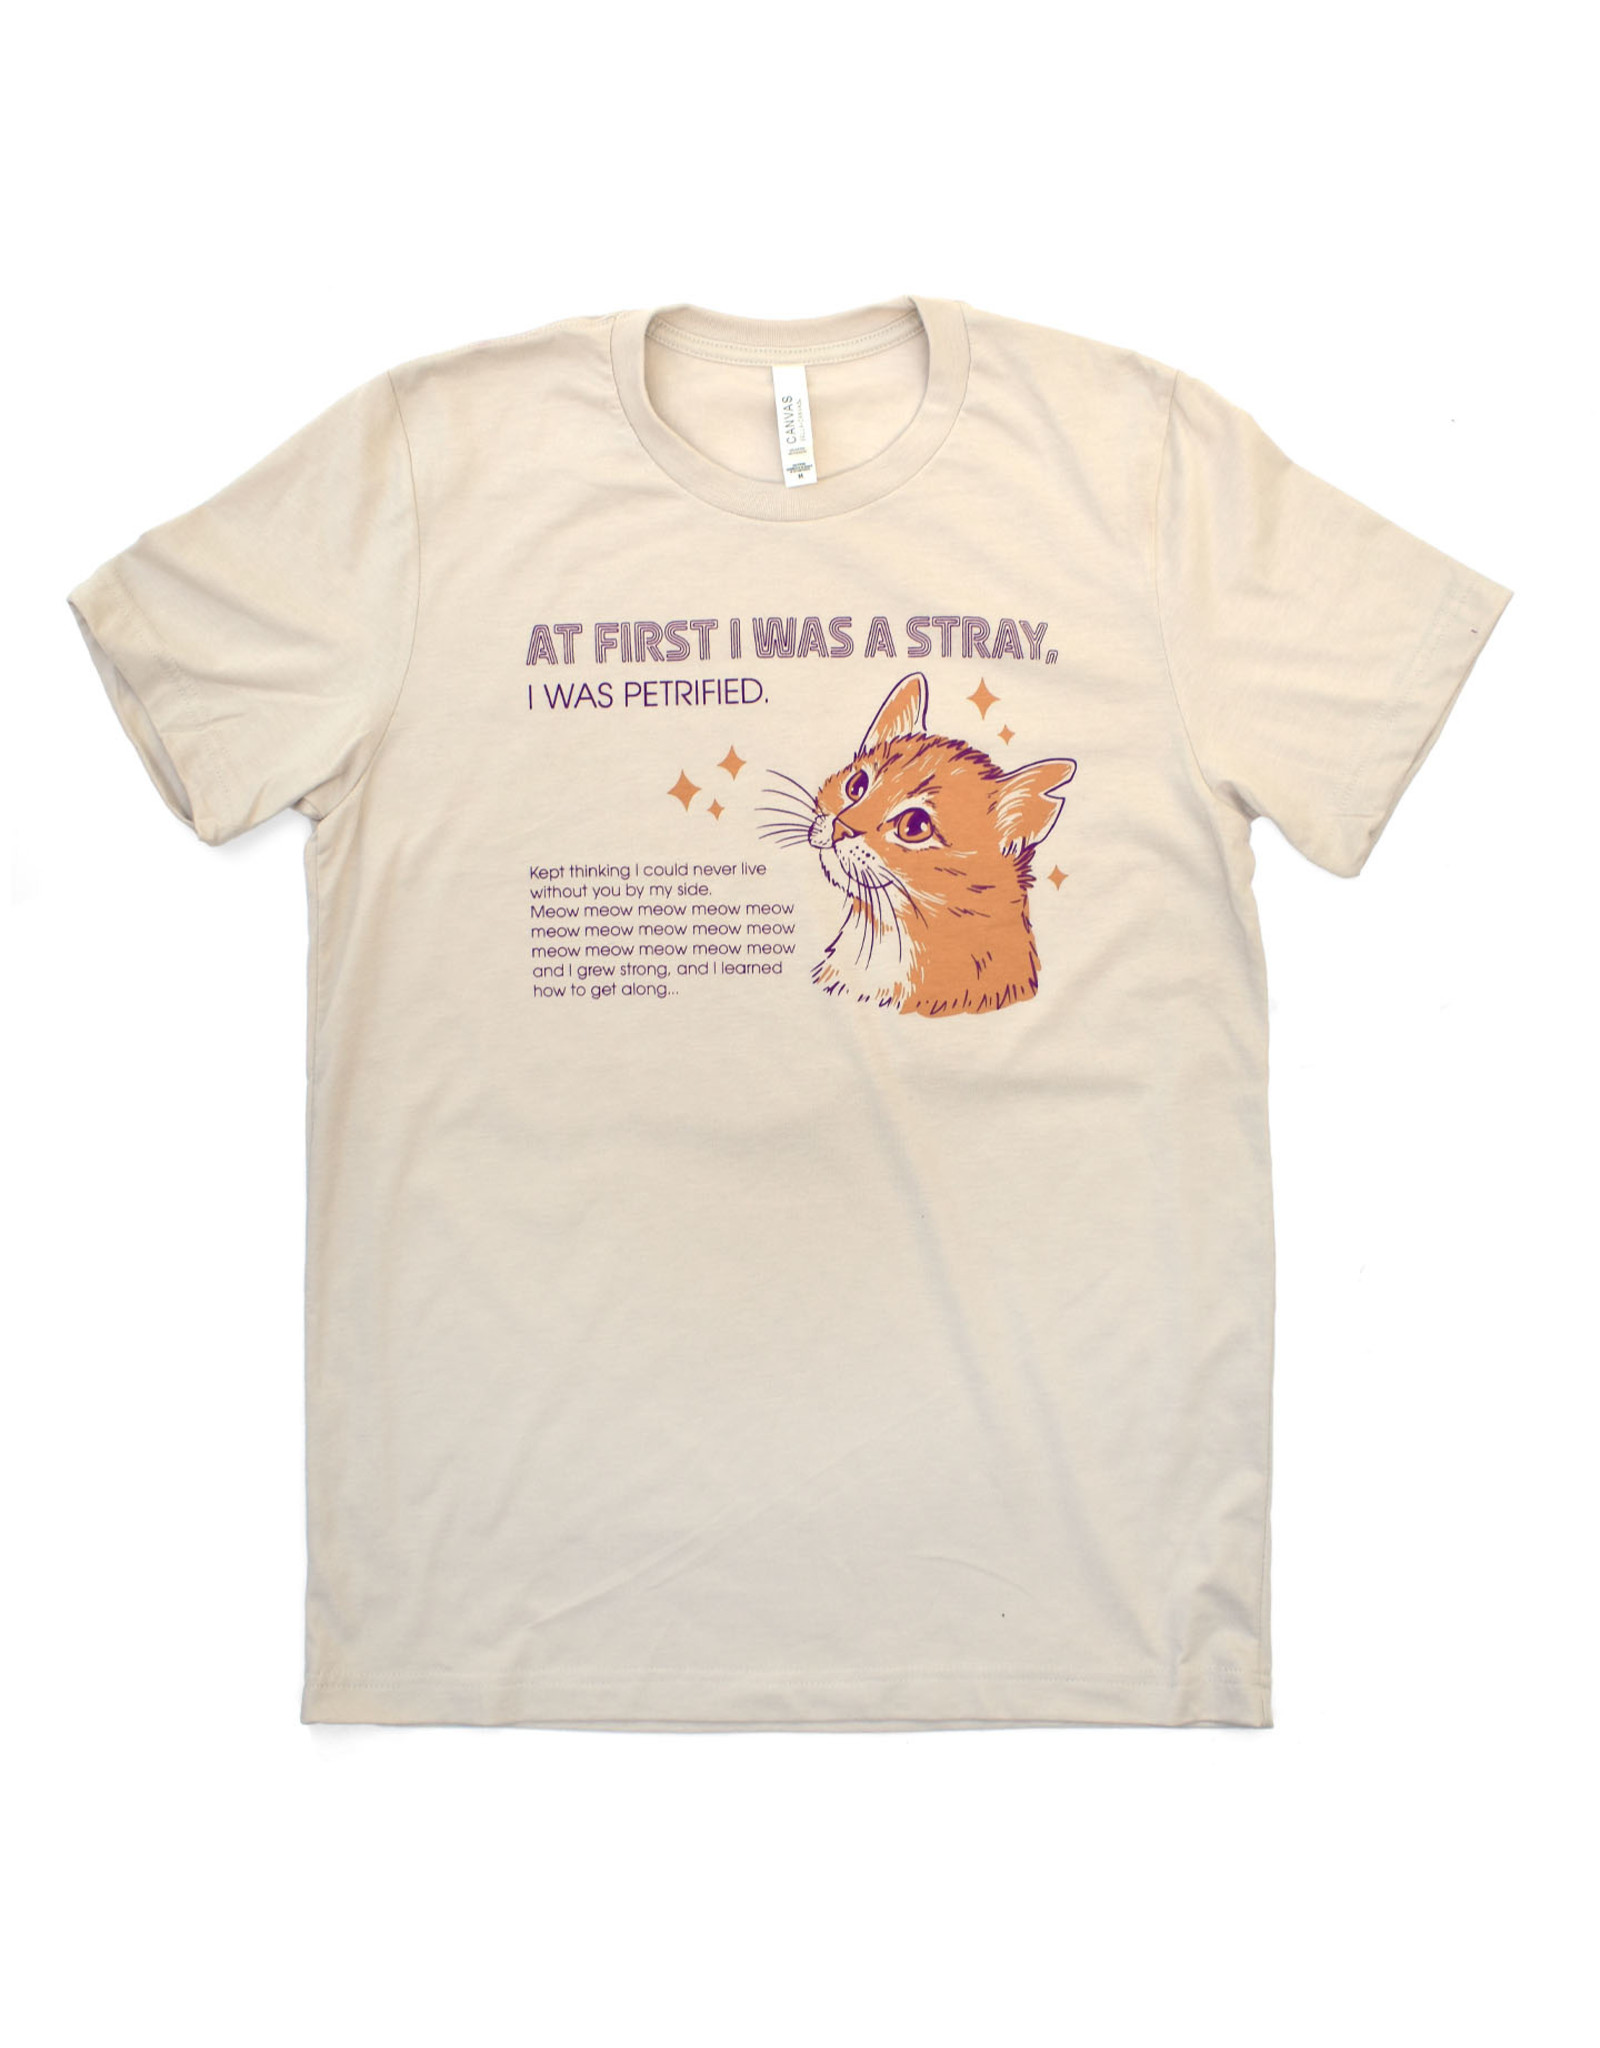 At First I Was a Stray (Cat) Shirt